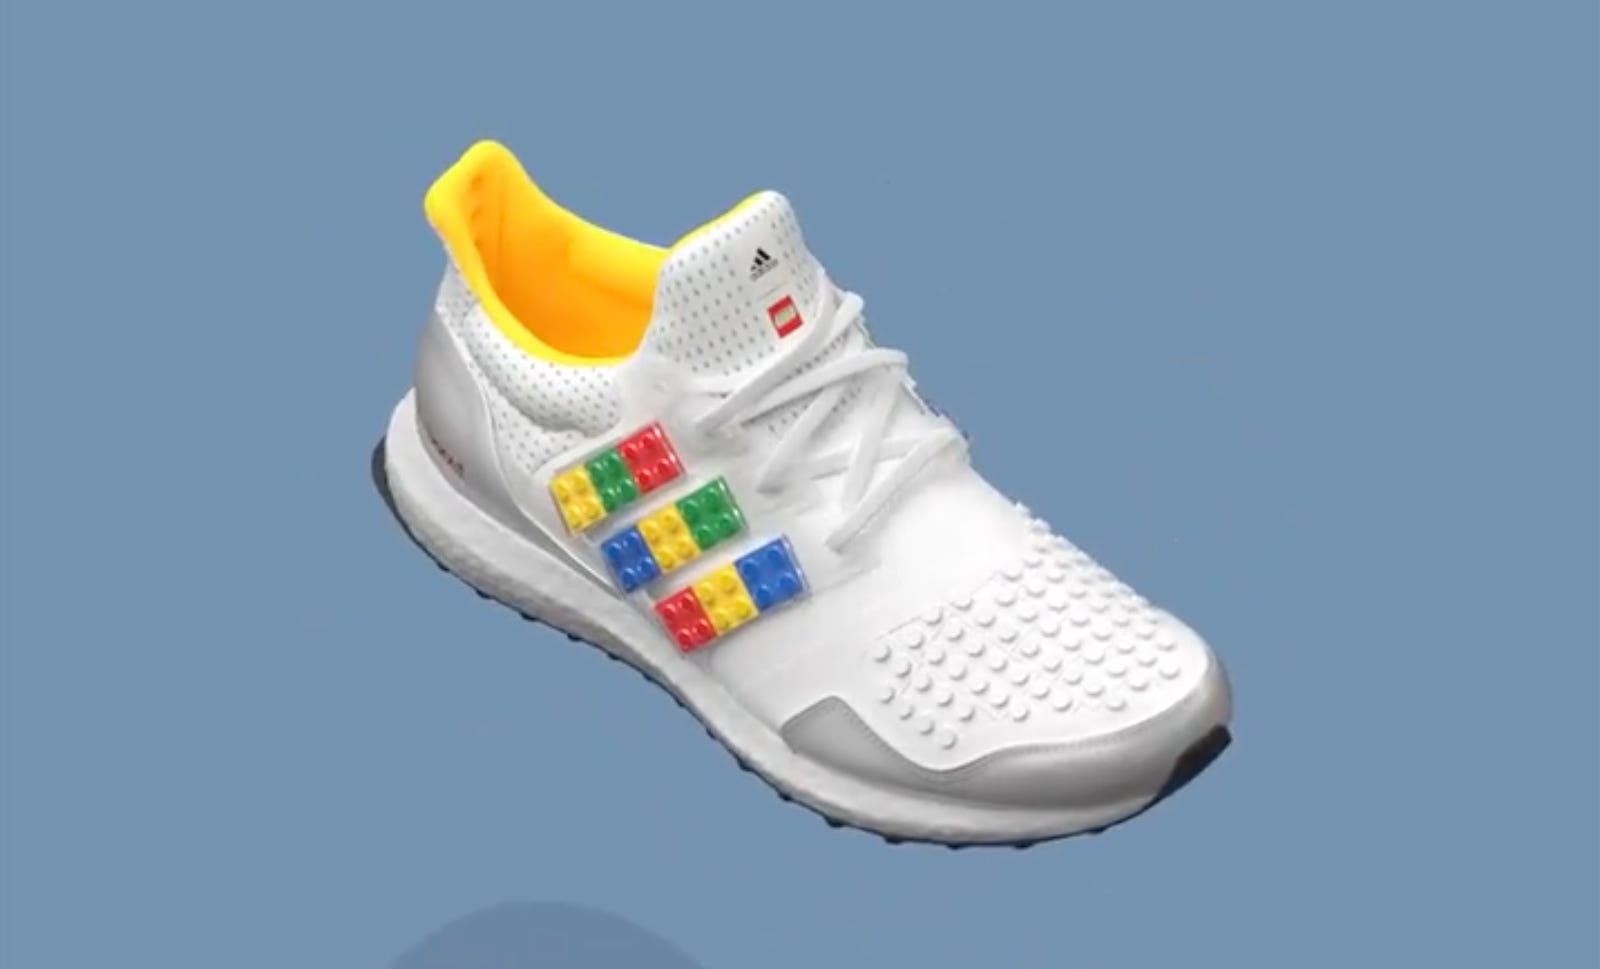 New Adidas Shoes Can Be Customized With Lego Pieces Cnet